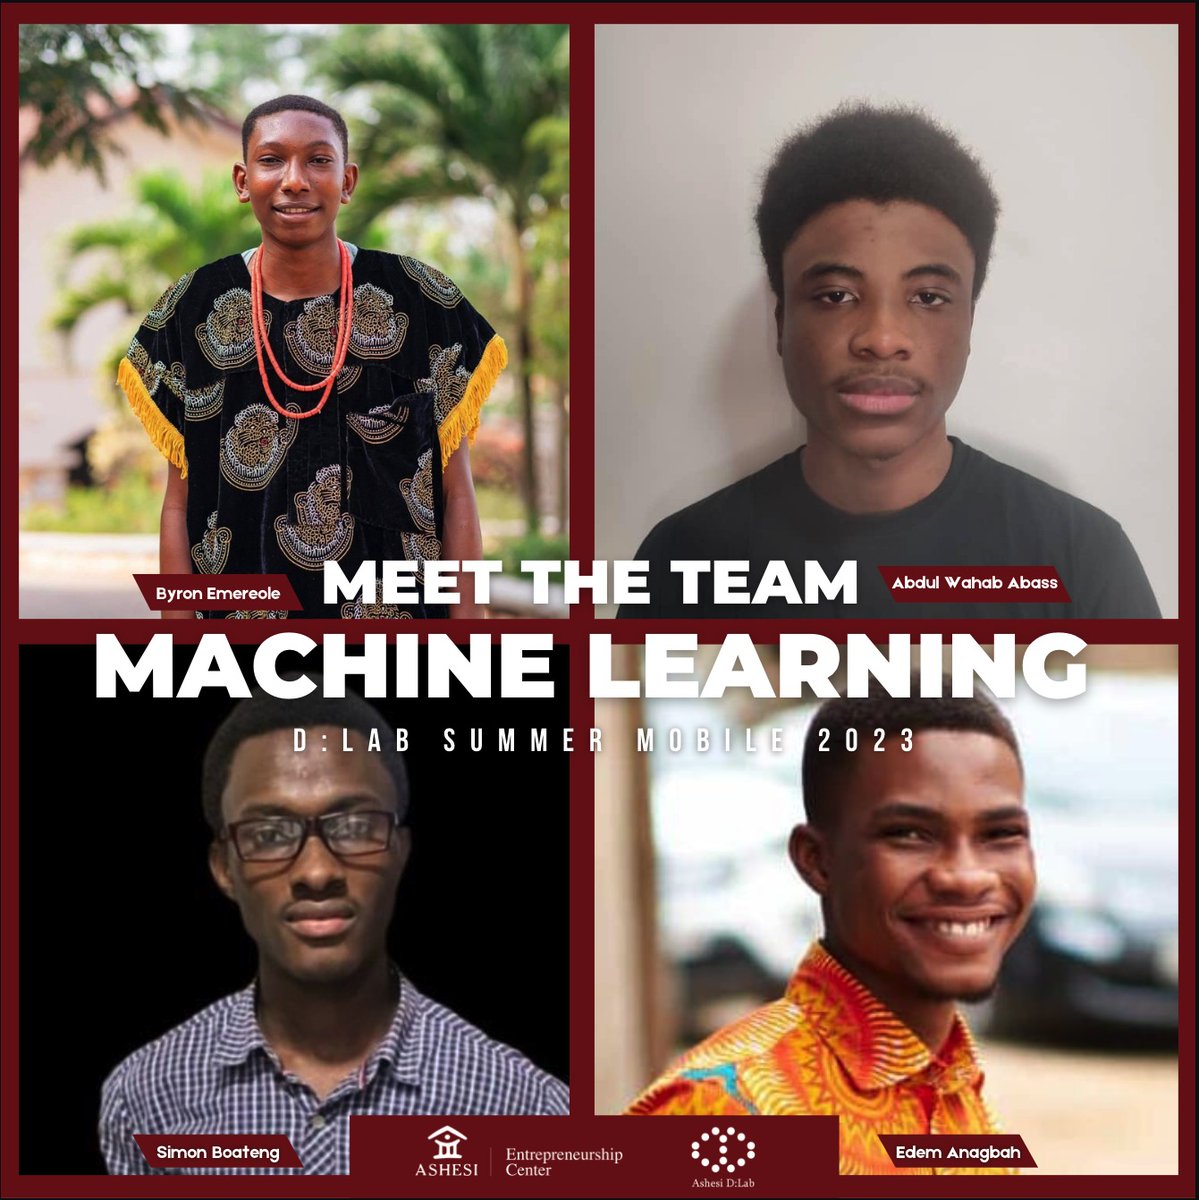 Meet the Machine Learning Summer mobile team🤩 This summer their objective is to build another functional #recommender system, build their #UI and #frontend application👨🏻‍💻 We are excited to see their progress by the end of the summer period👏 #atasheshidlab #ashesientship